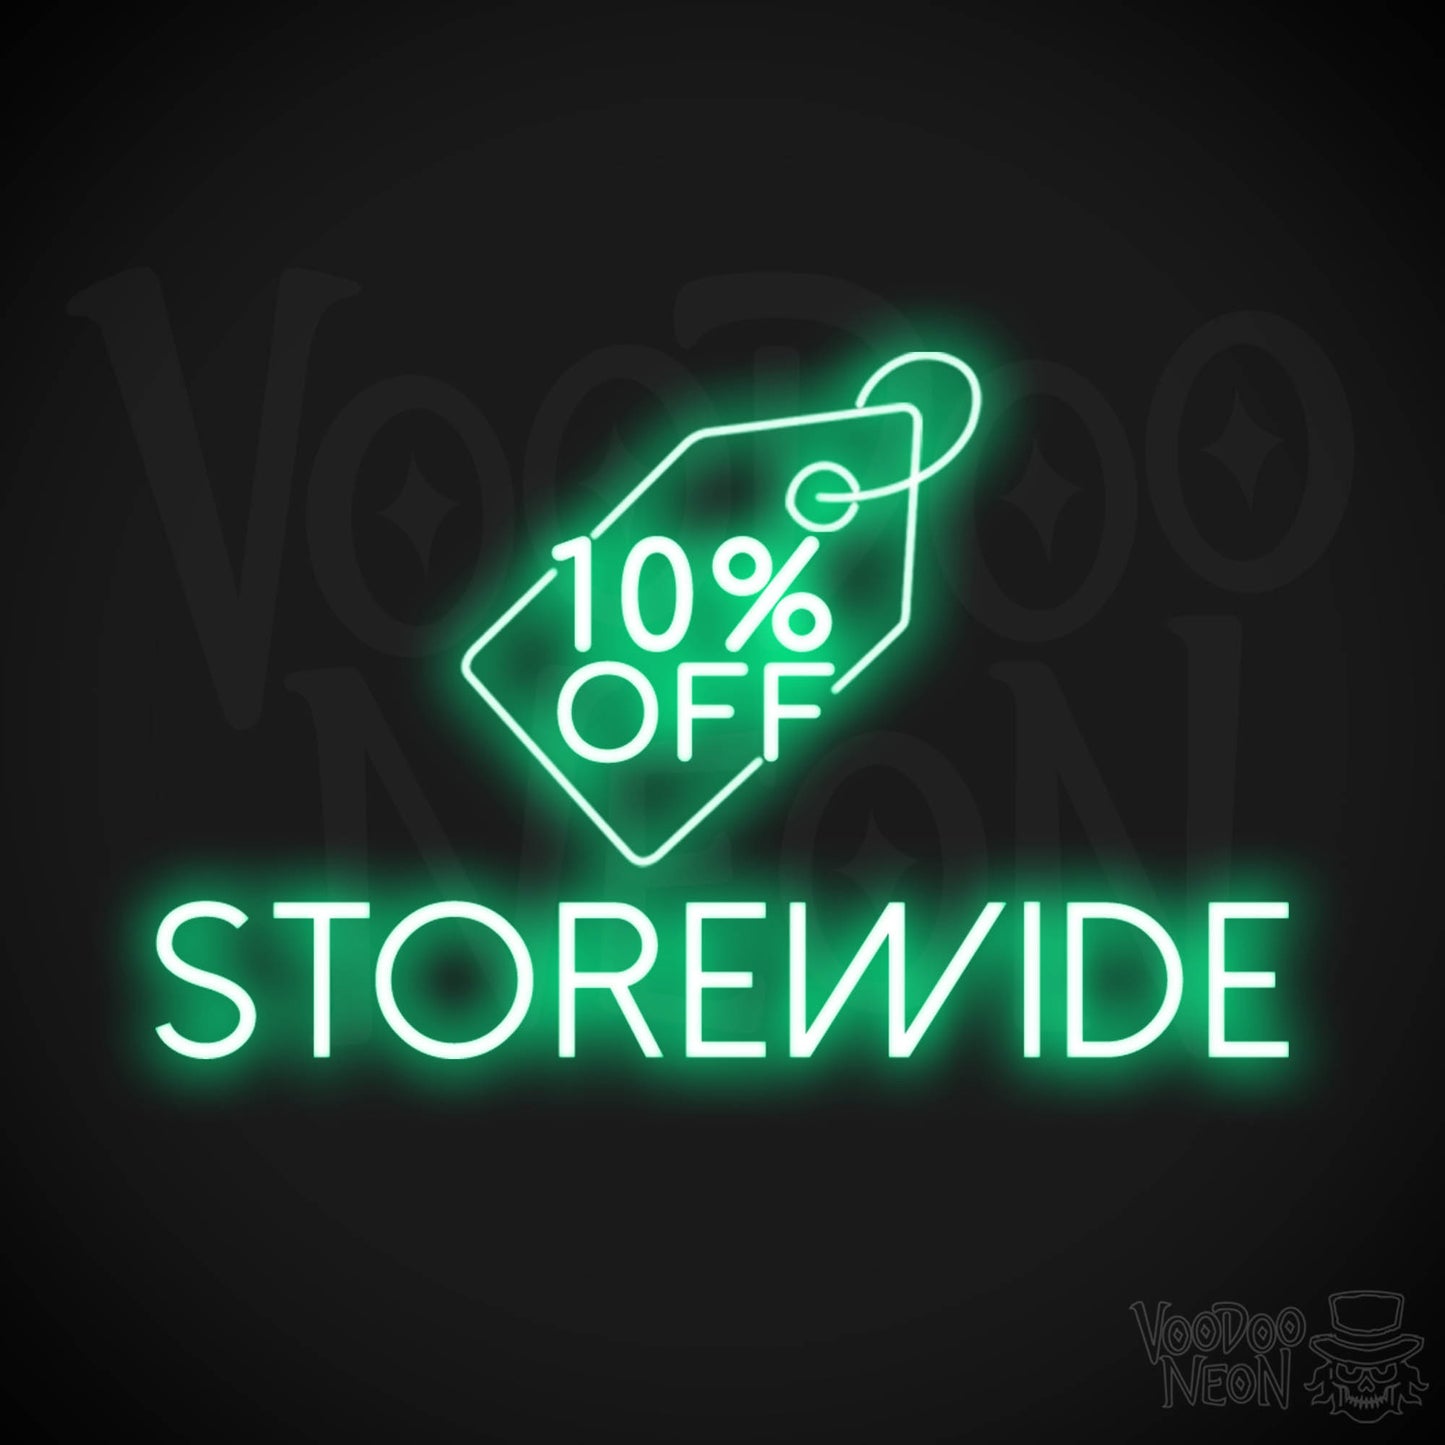 10% Off Storewide Neon Sign - 10% Off Storewide Sign - Neon Shop Signs - Color Green